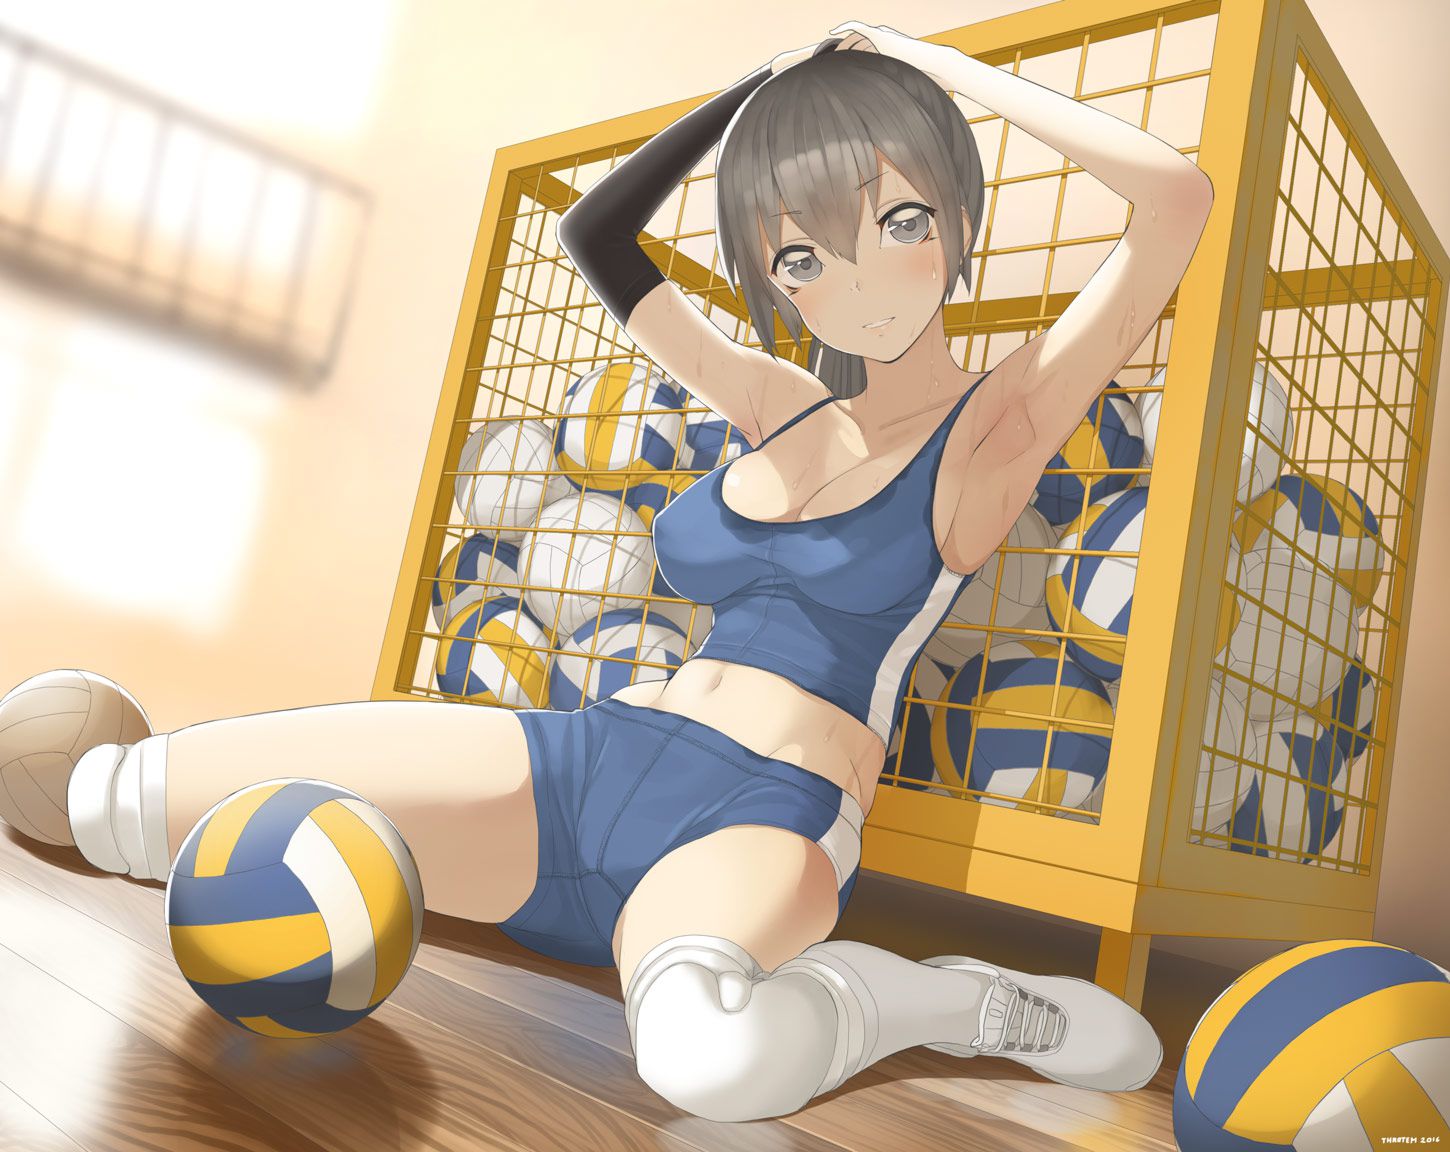 Erotic anime summary erotic image of a girl with a body line where sportswear is too much [secondary erotic] 24